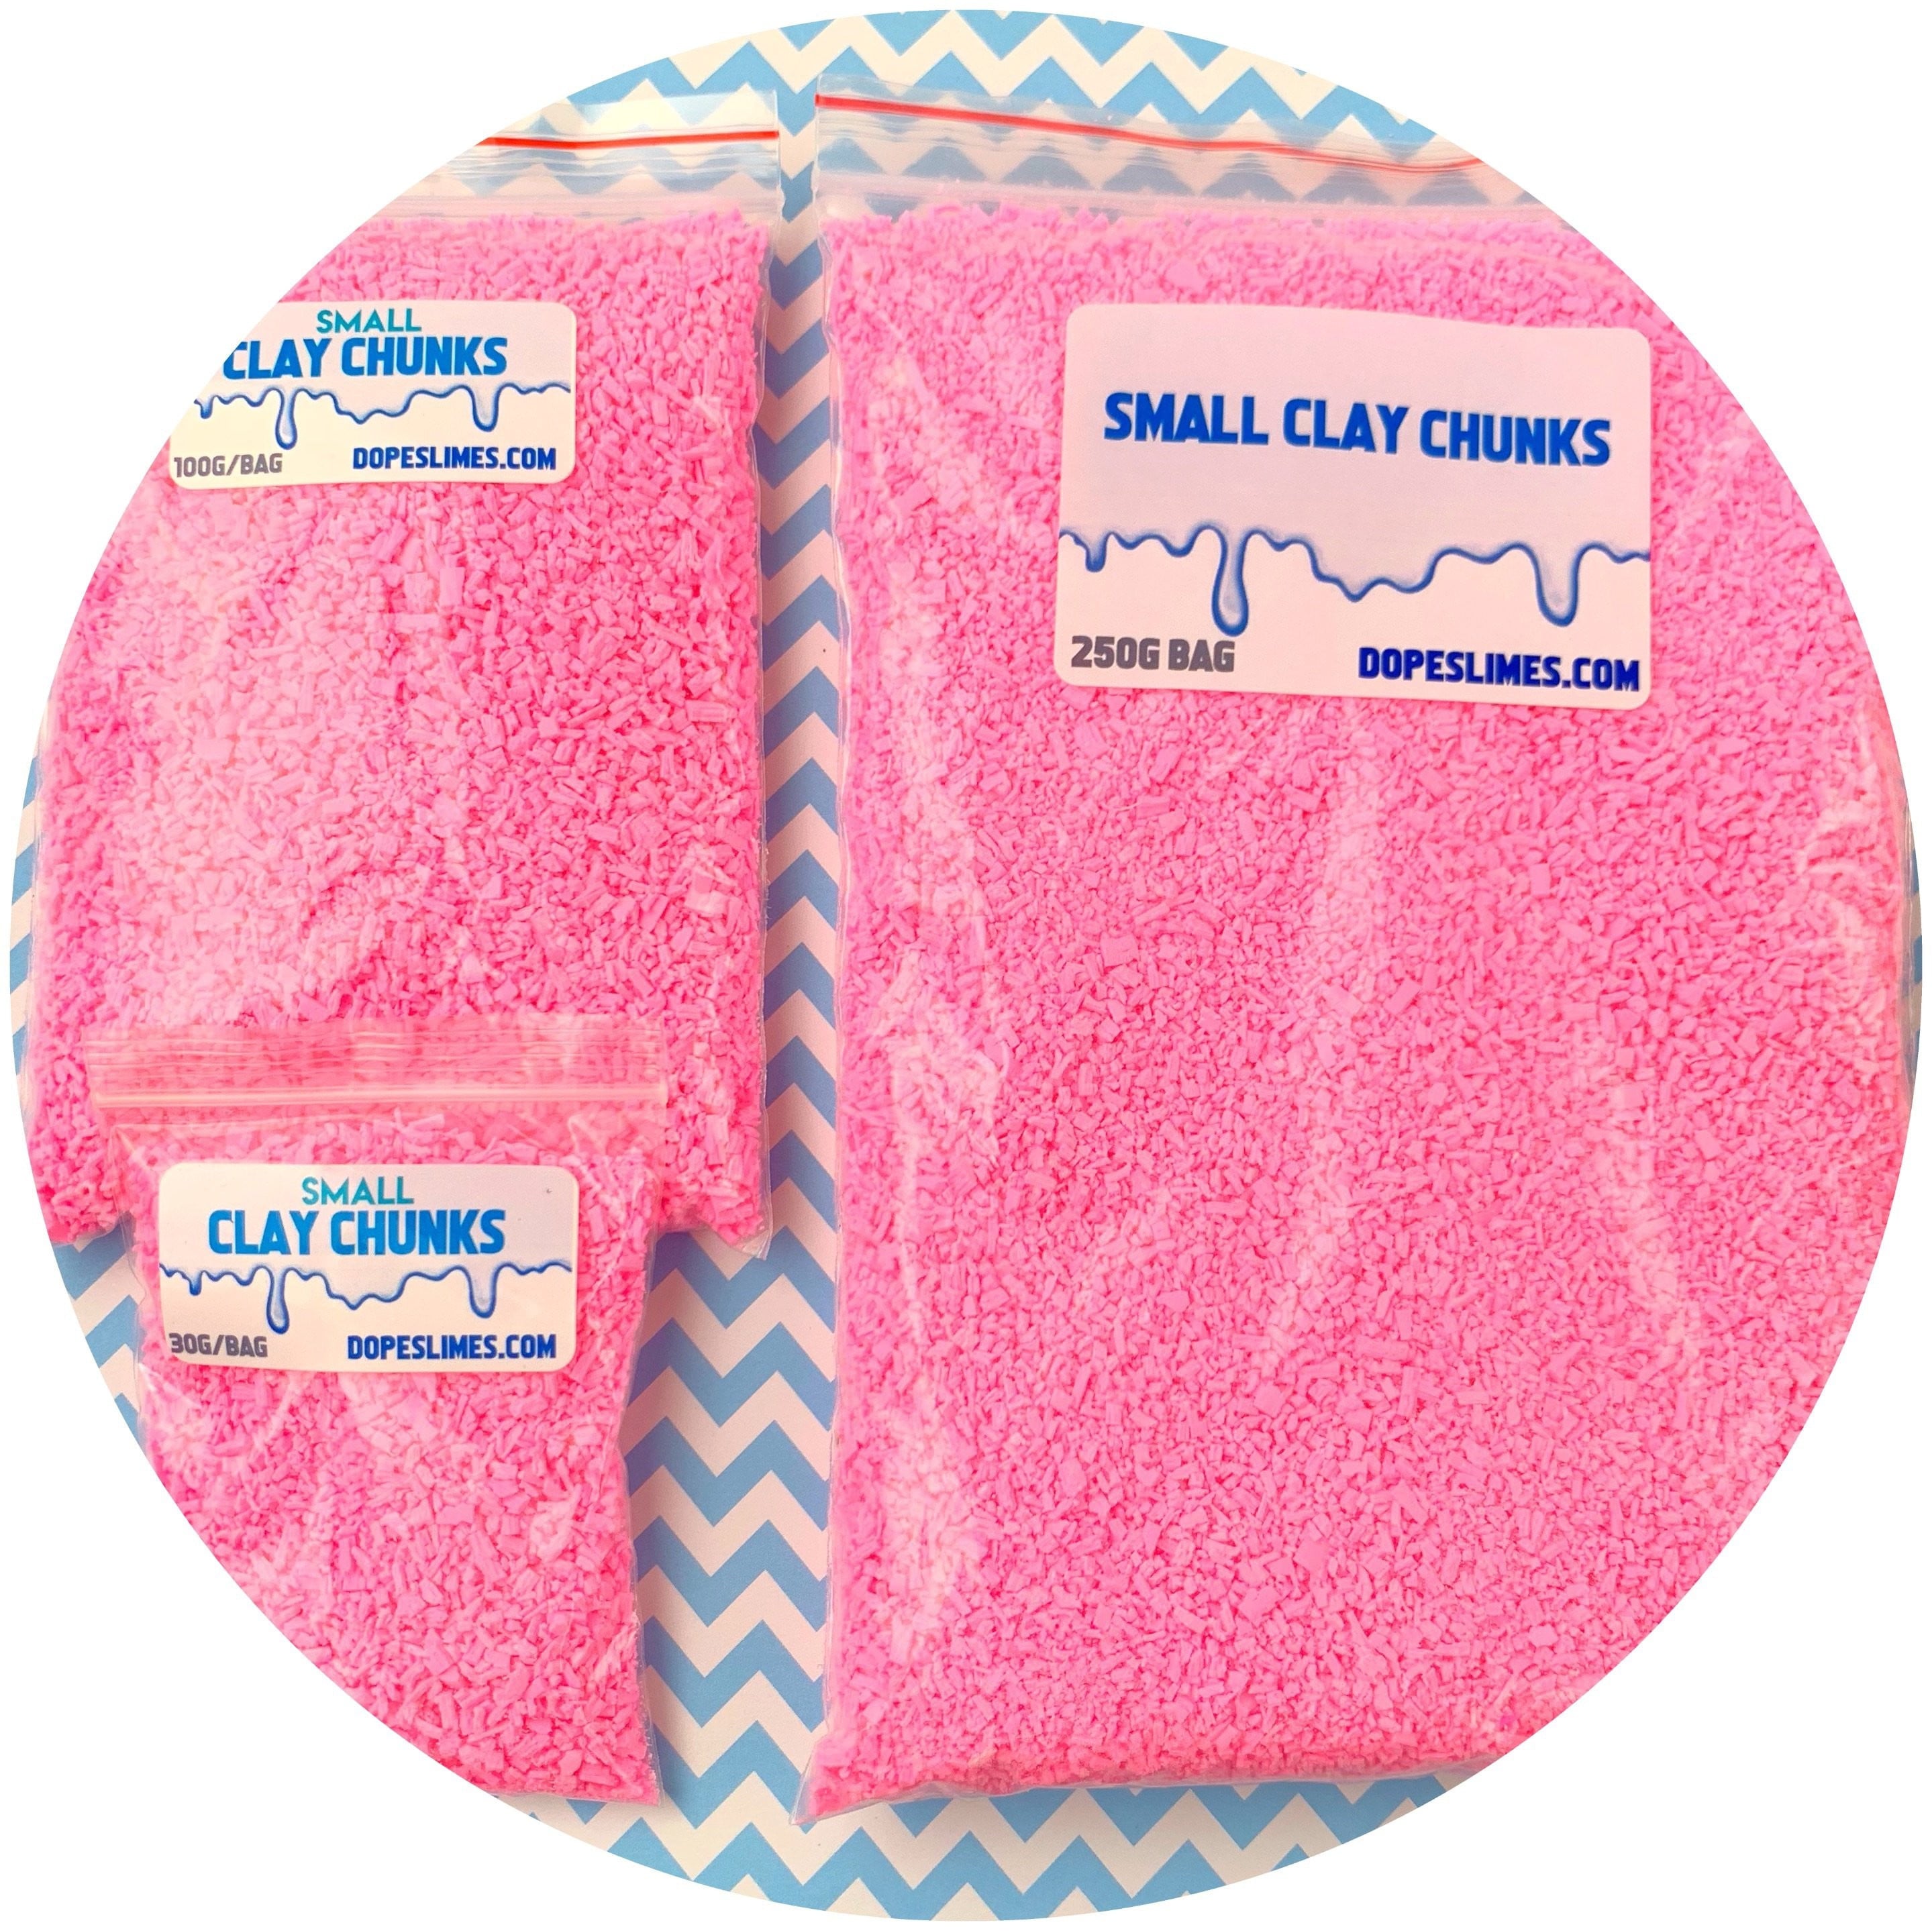 Pink and White Heart-Shaped Thick Sponges Pack of 2 by Minky